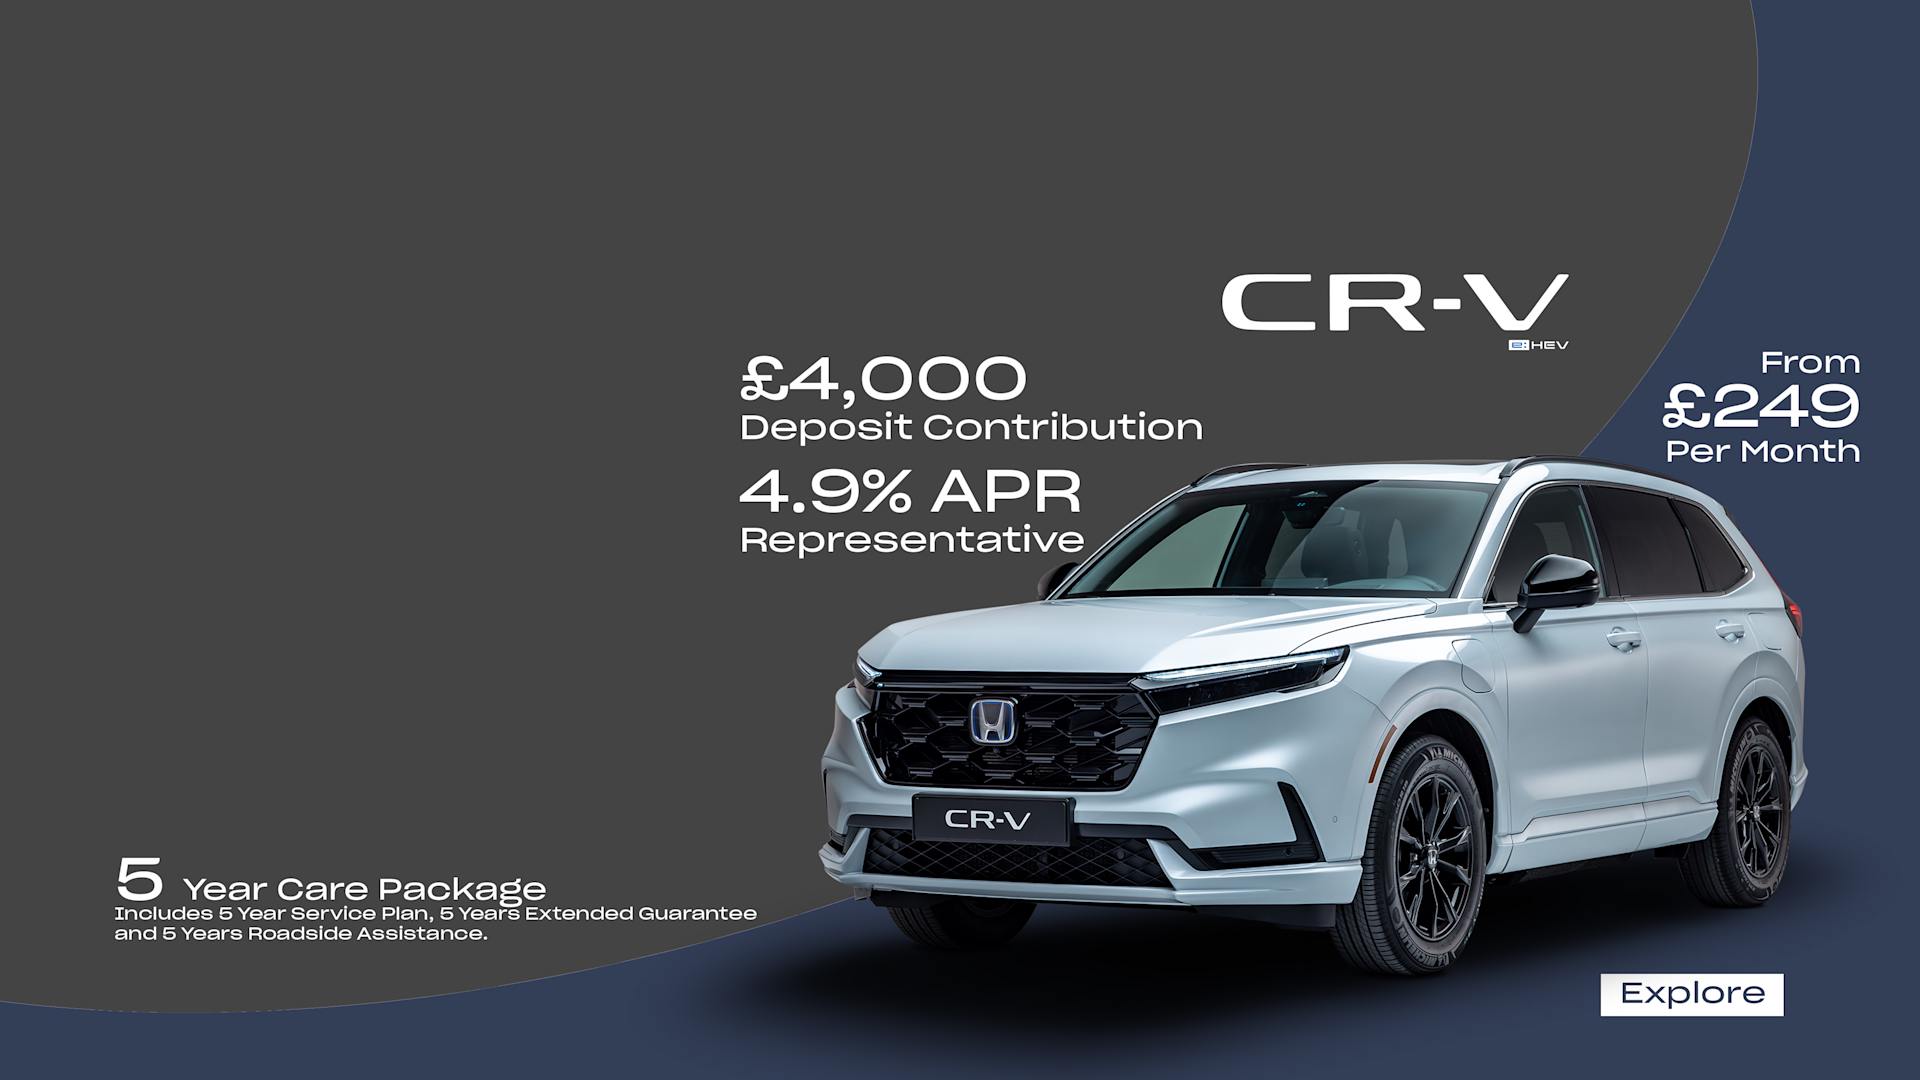 CR-V from £249 per month